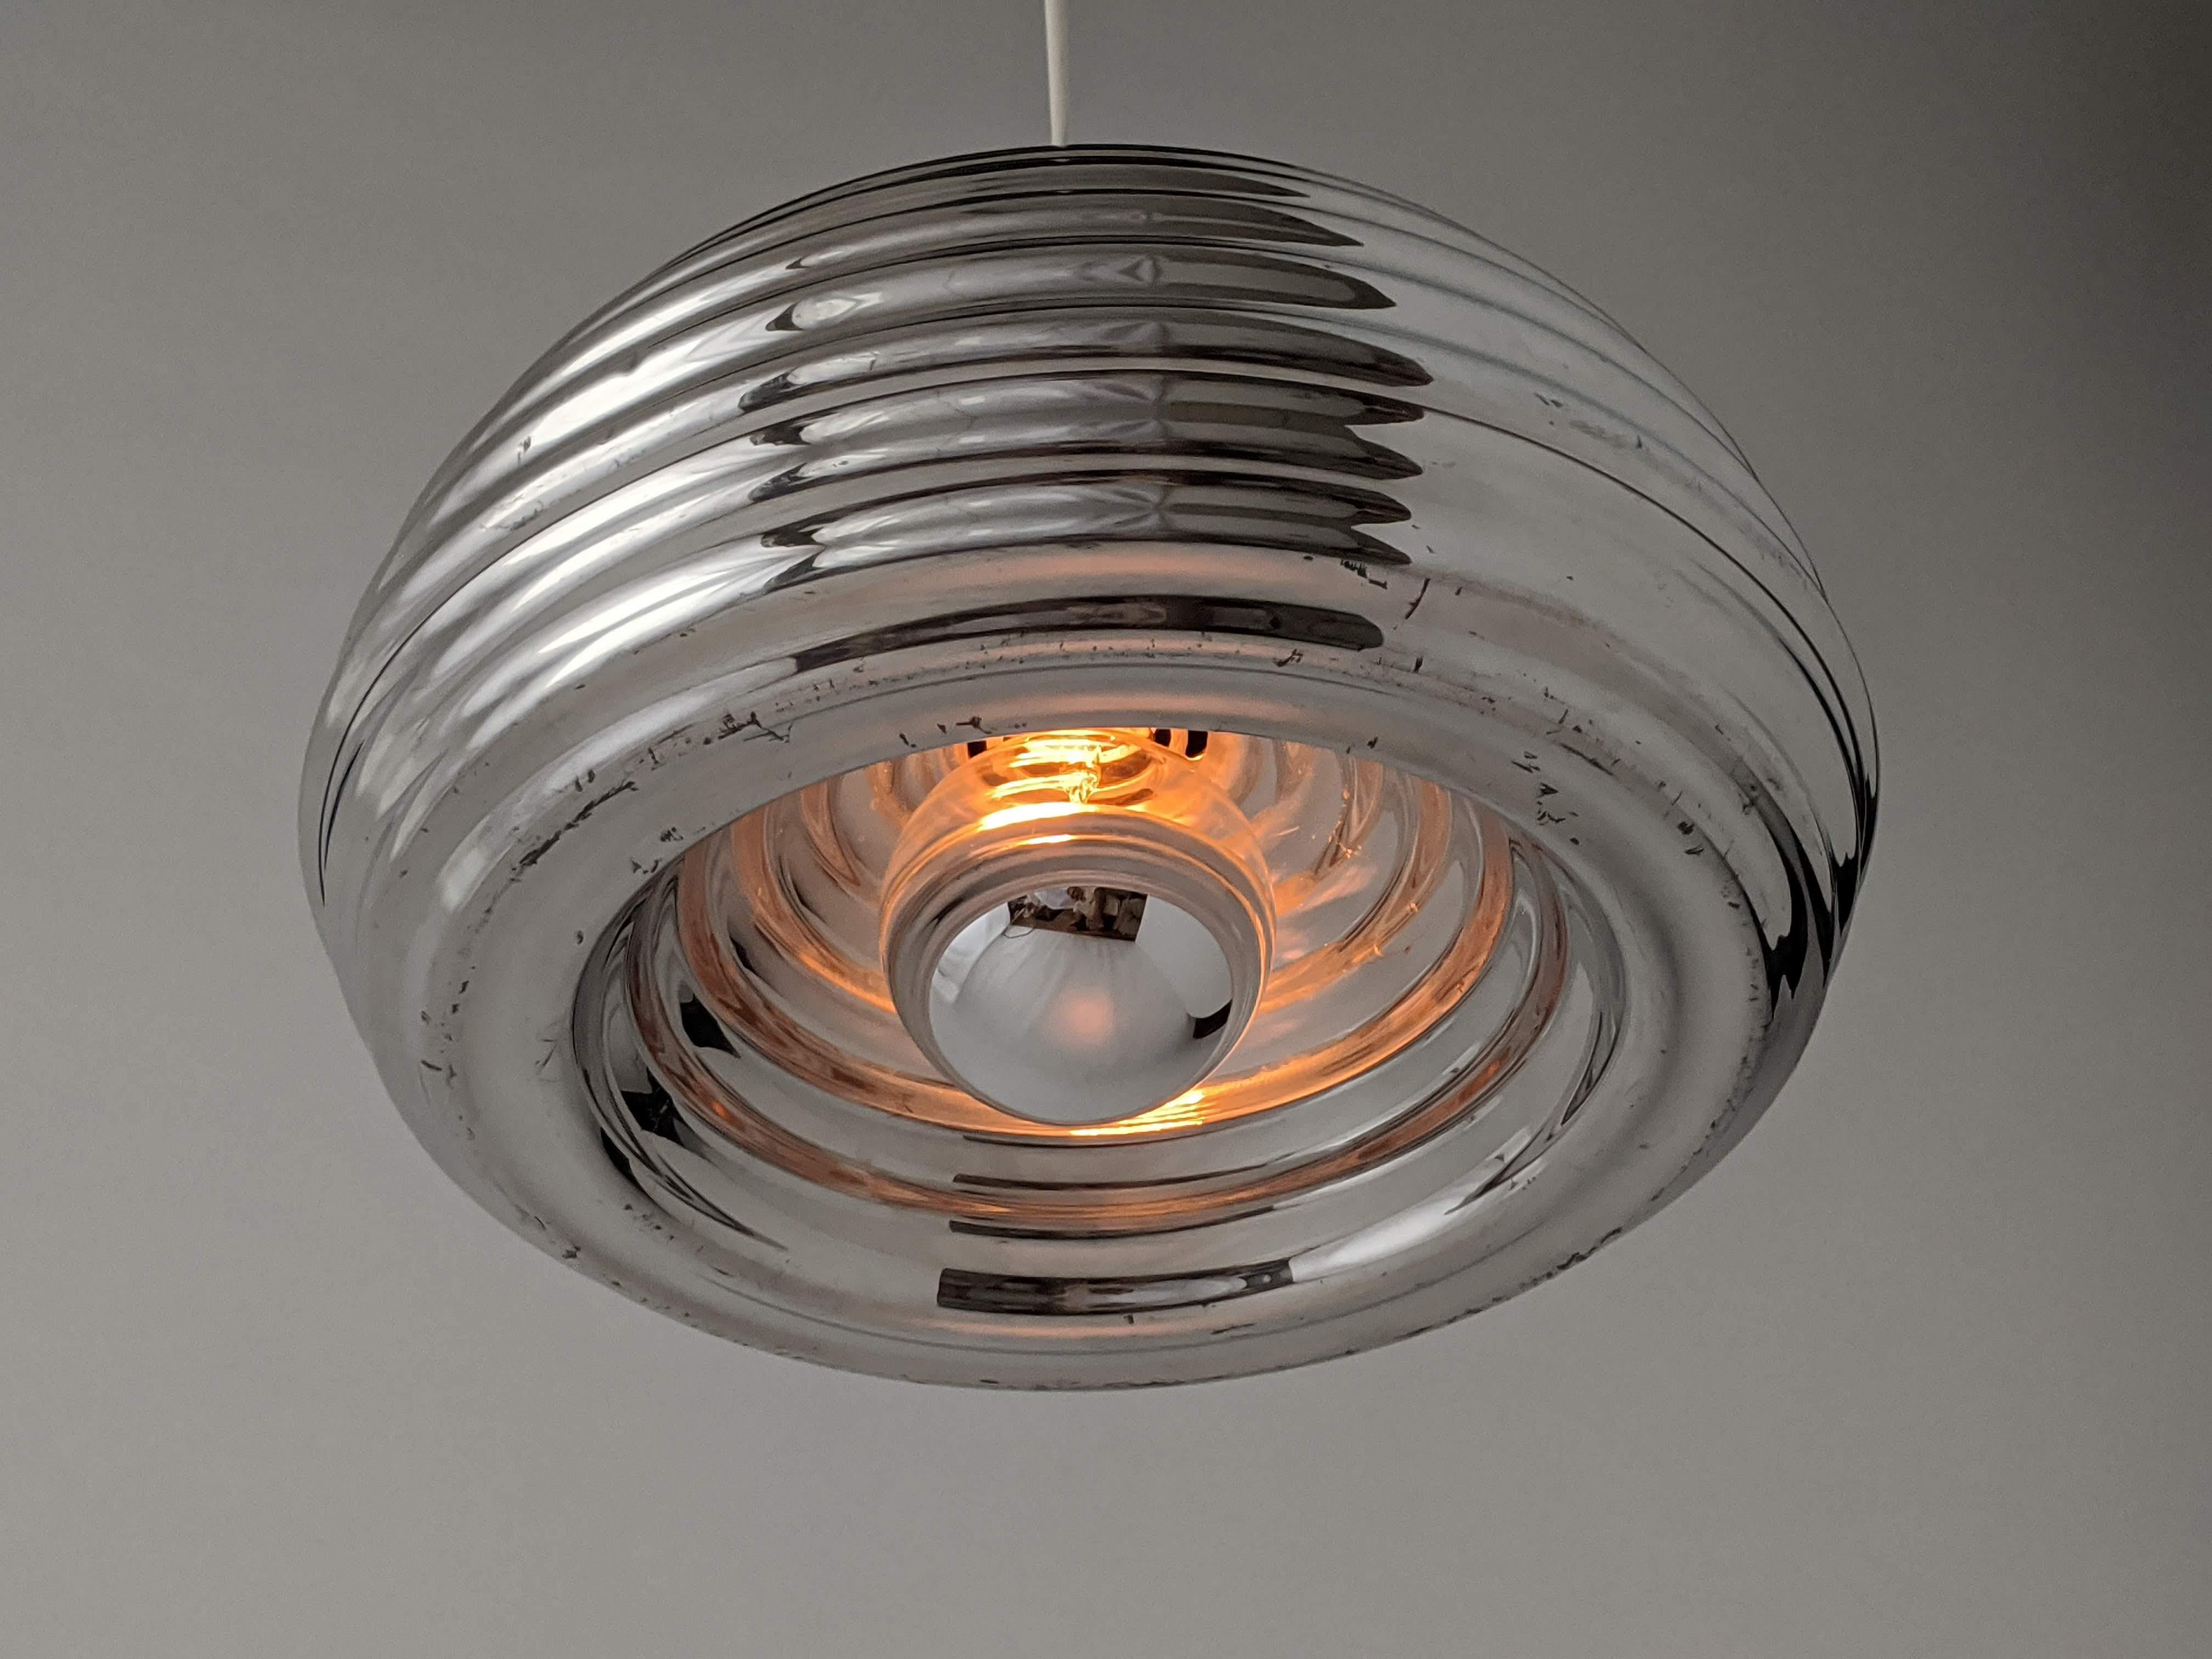 Original non lacquered early edition of this intriguingly designed pendant made of polished aluminium. 

One E27 size ceramic socket rated at 100 watt. 

Mirror top light bulb supplied with order. 

Come with 5 feet of wire with chrome